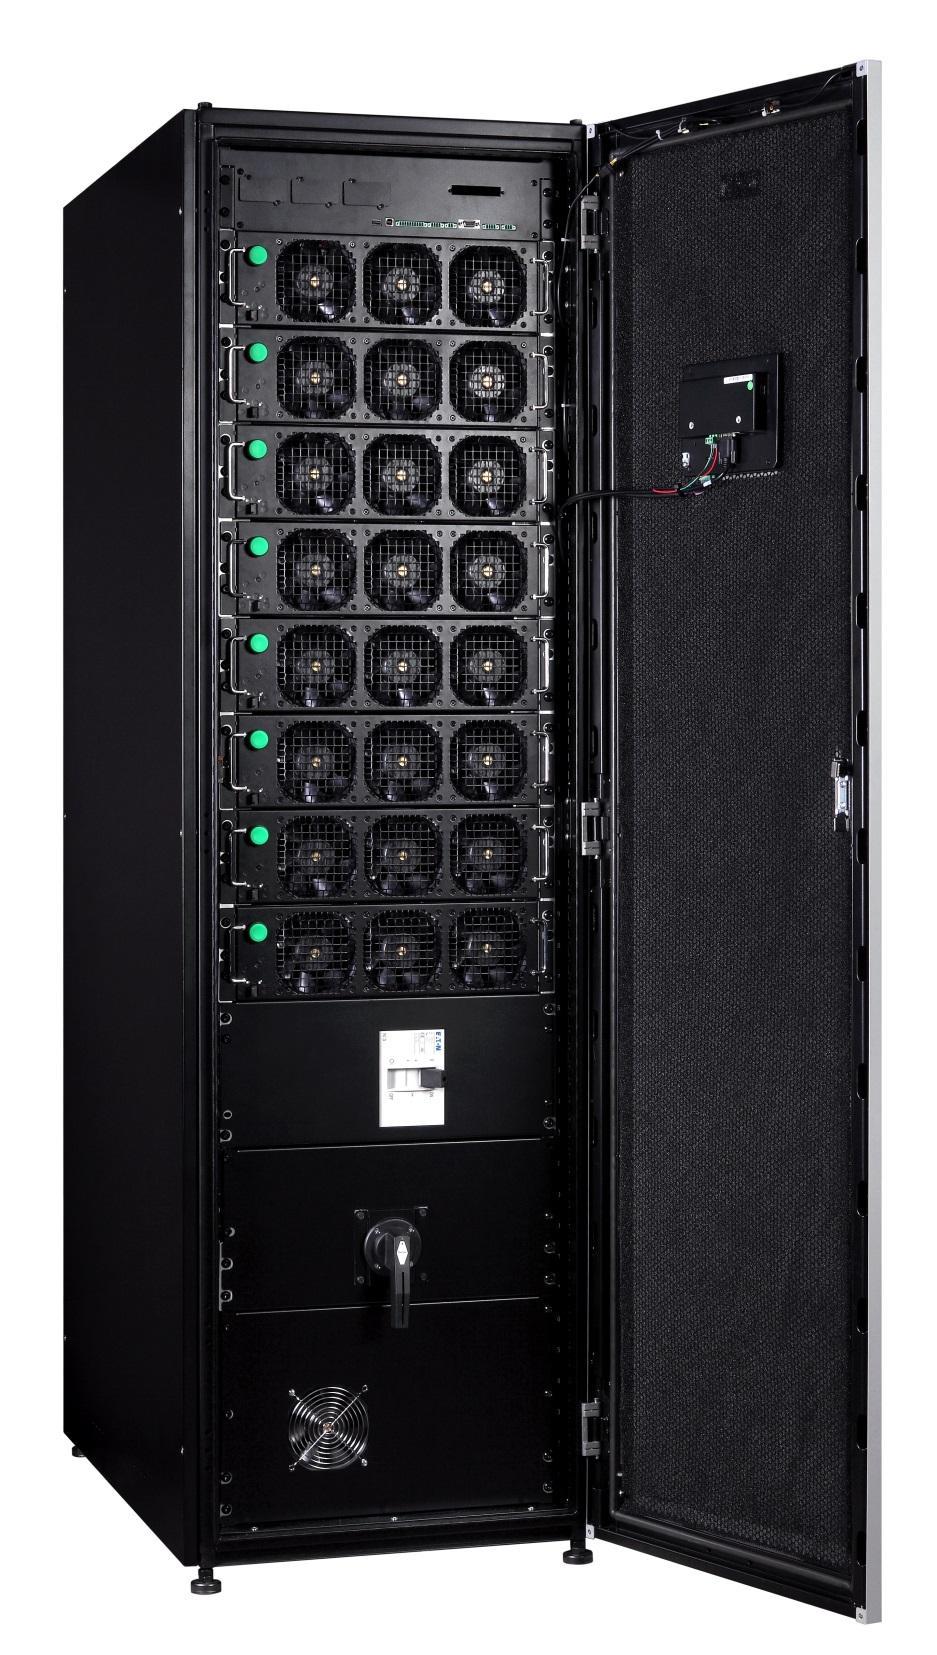 Maximum availability is integral to business continuity, and integral to the design of the Eaton 93PR UPS. It ensures you can always access the power your mission-critical application requires.